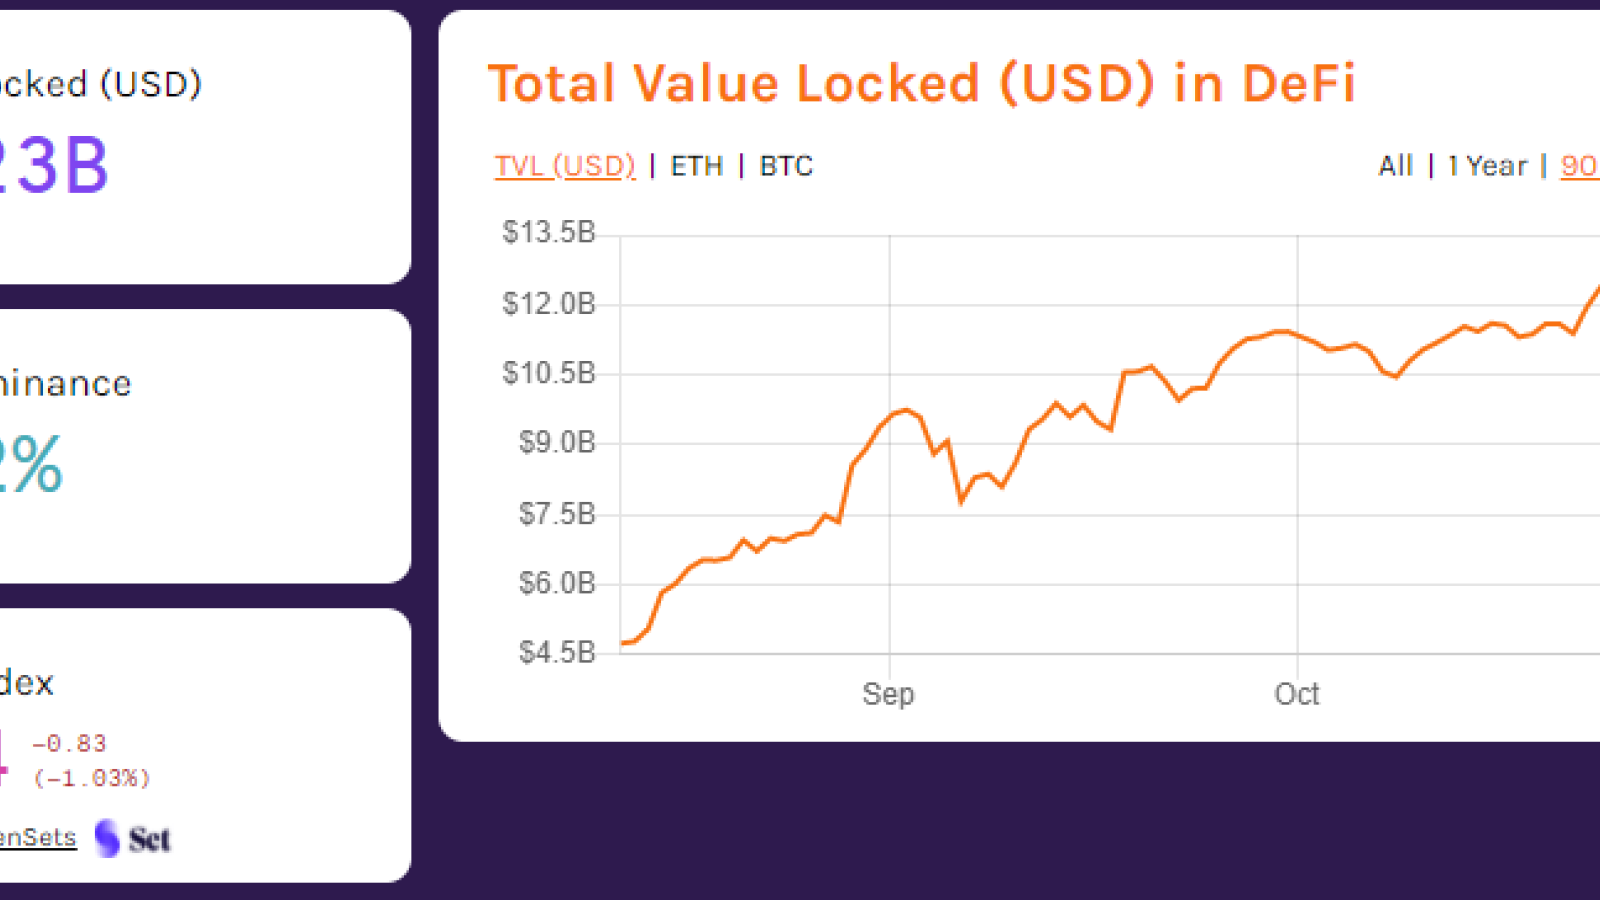 The total value locked in DeFi. Source: Defipulse.com